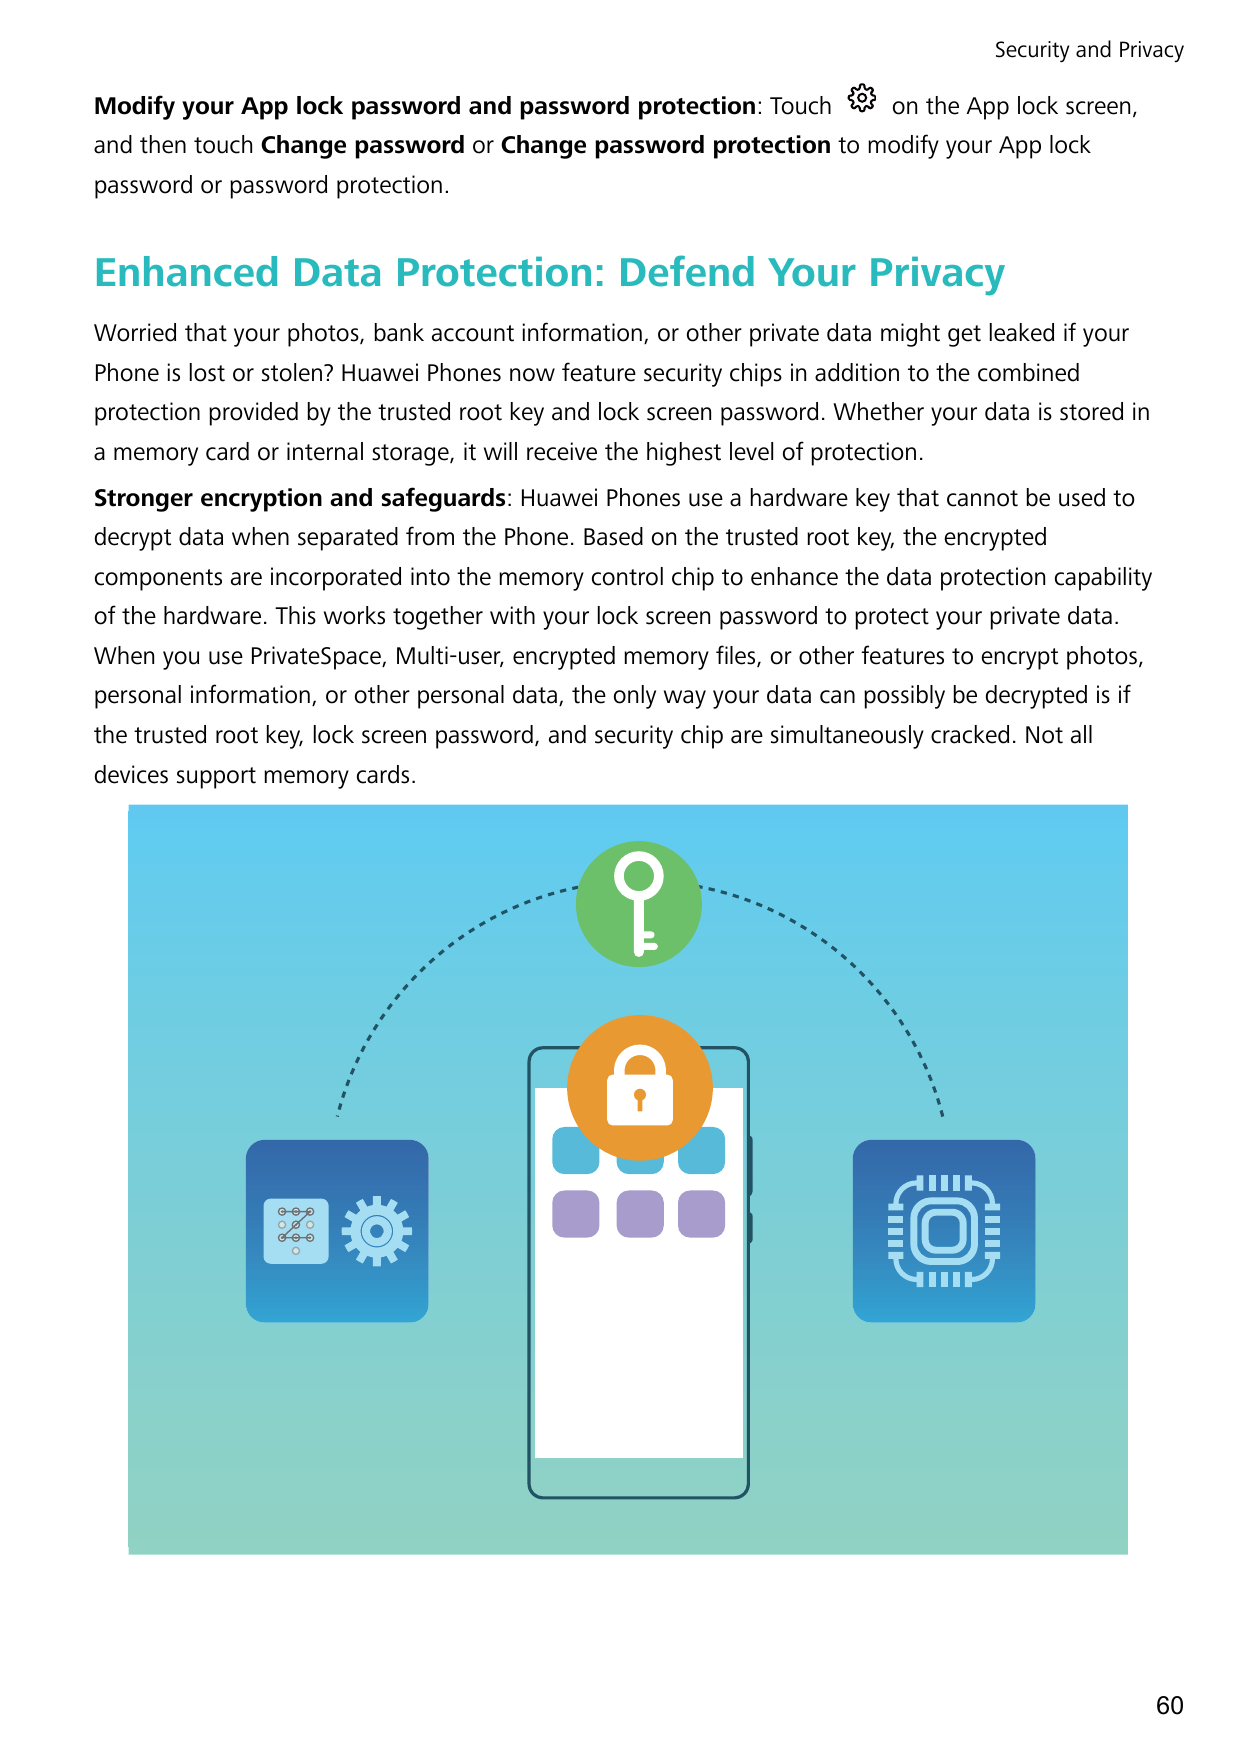 Security and PrivacyModify your App lock password and password protection: Touchon the App lock screen,and then touch Change pas